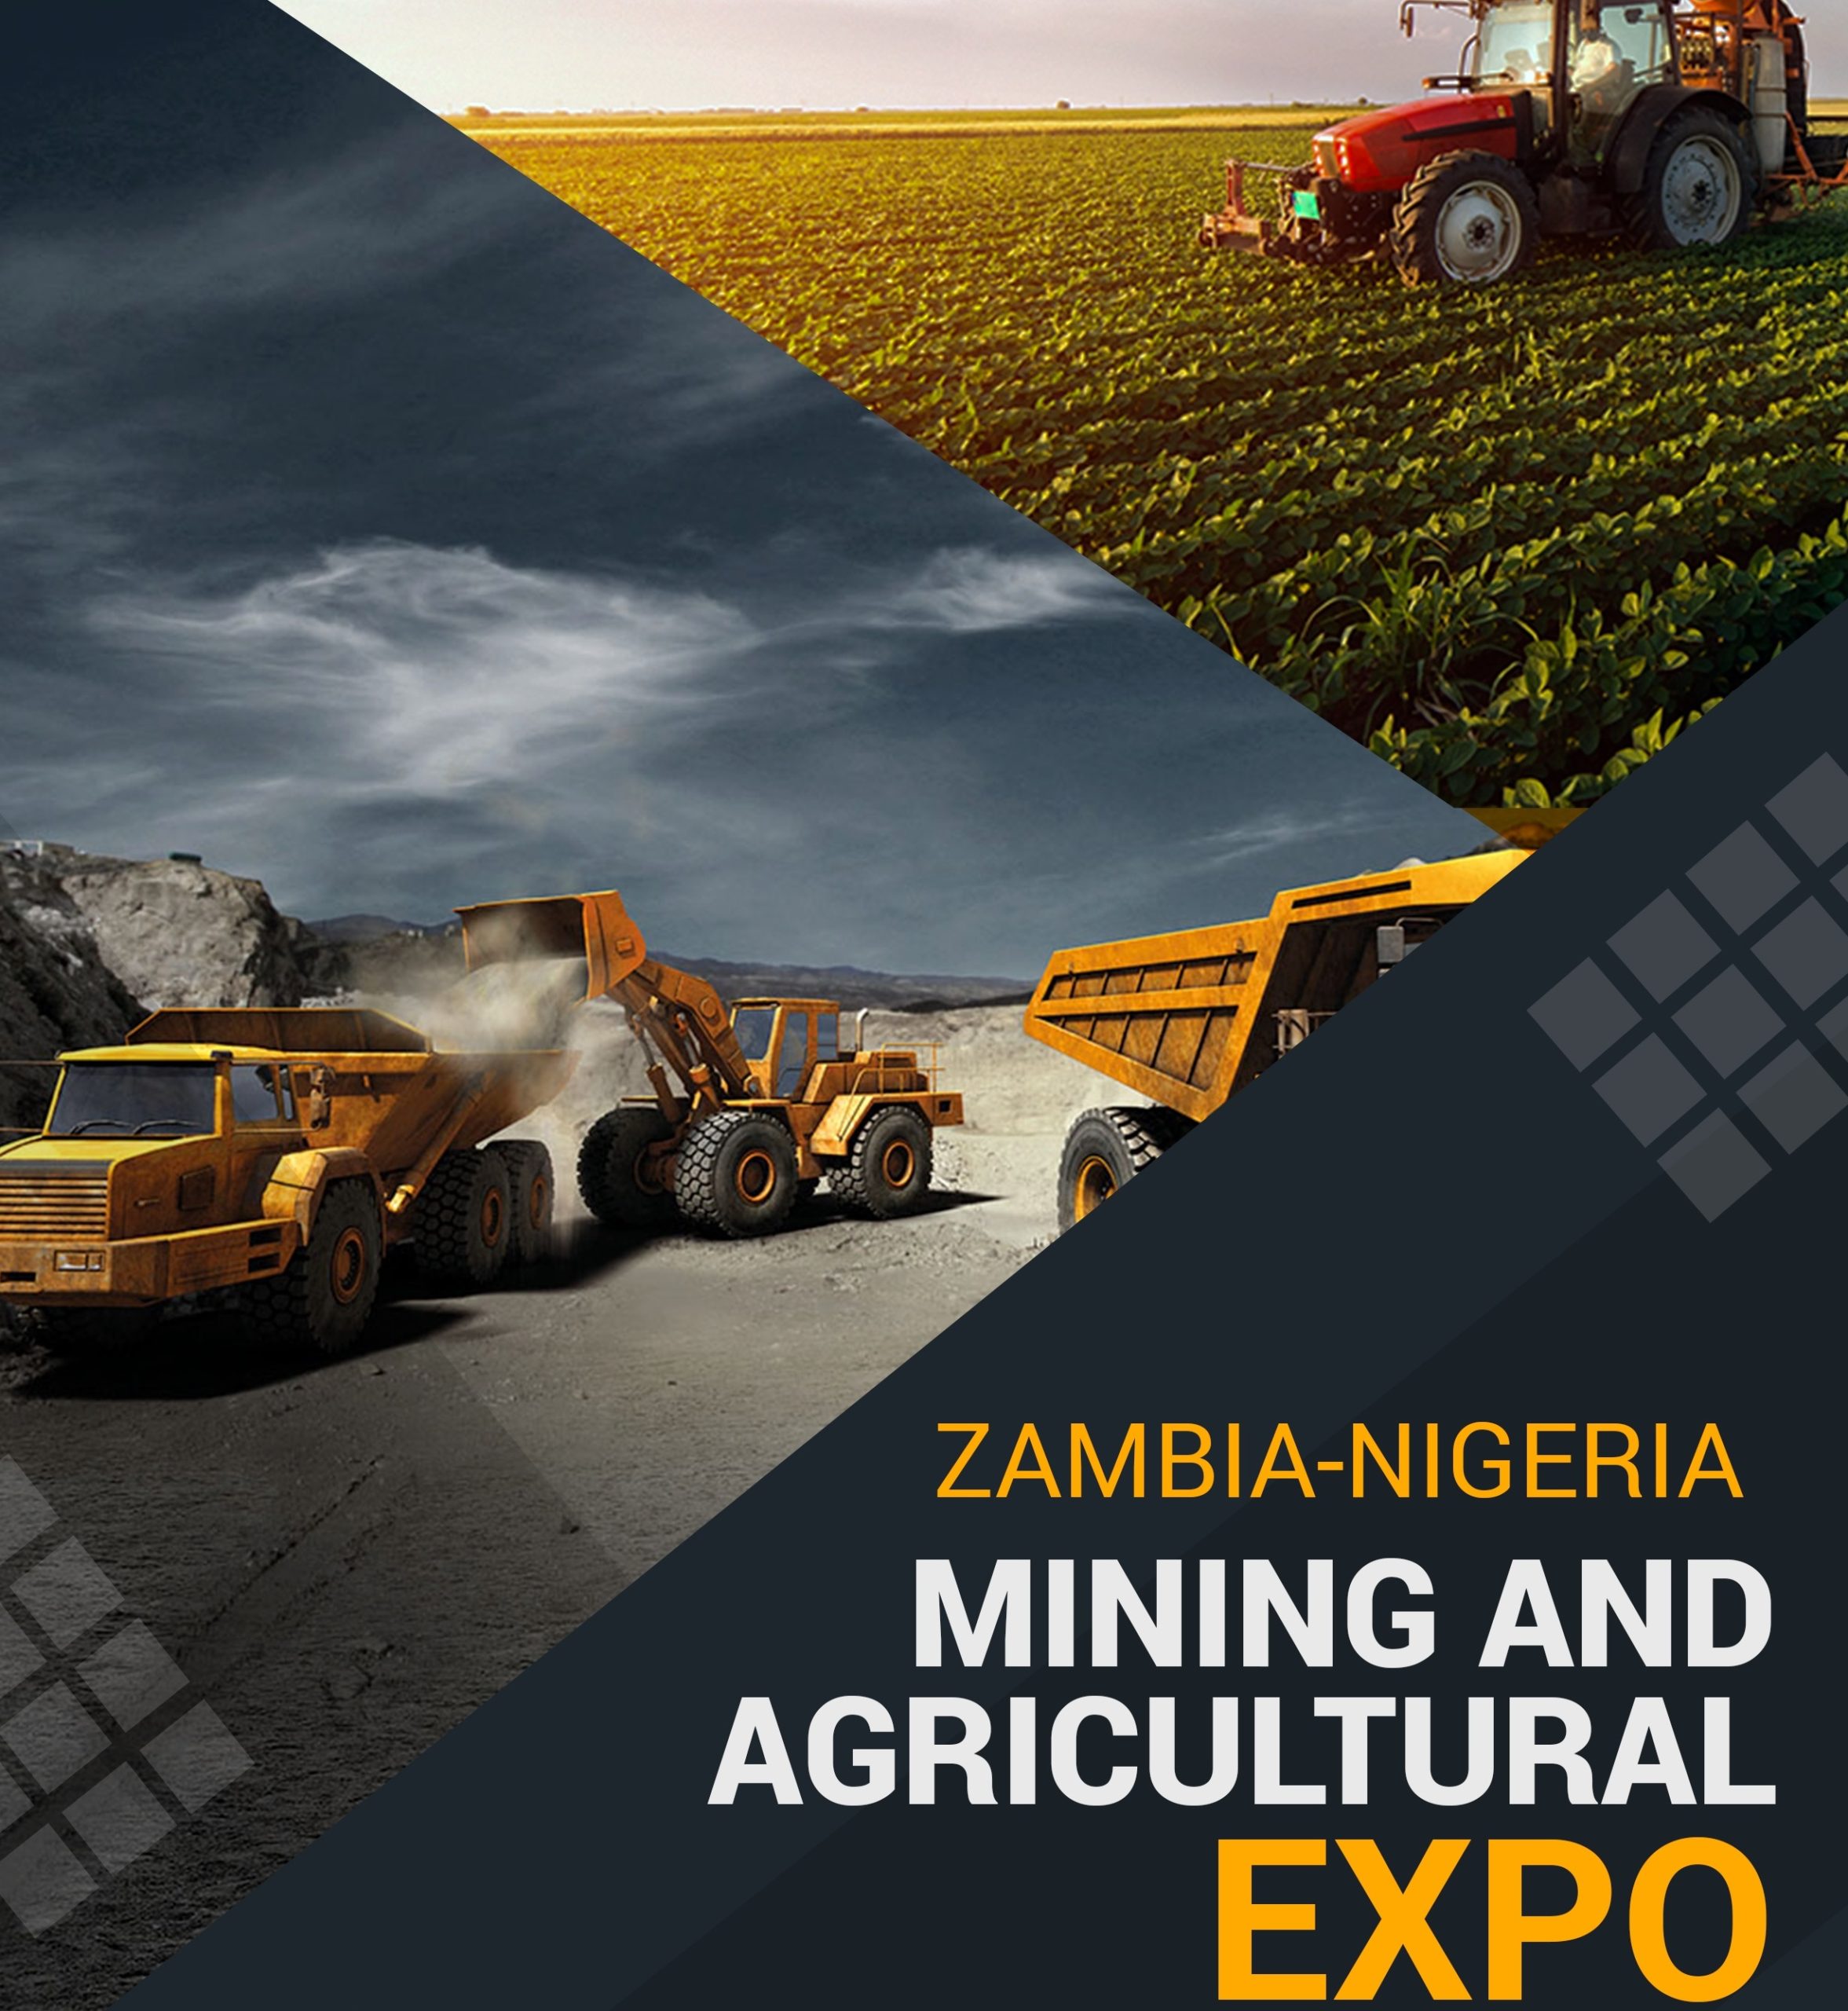 Zambia-Nigeria Mining and Agricultural Expo Flyer